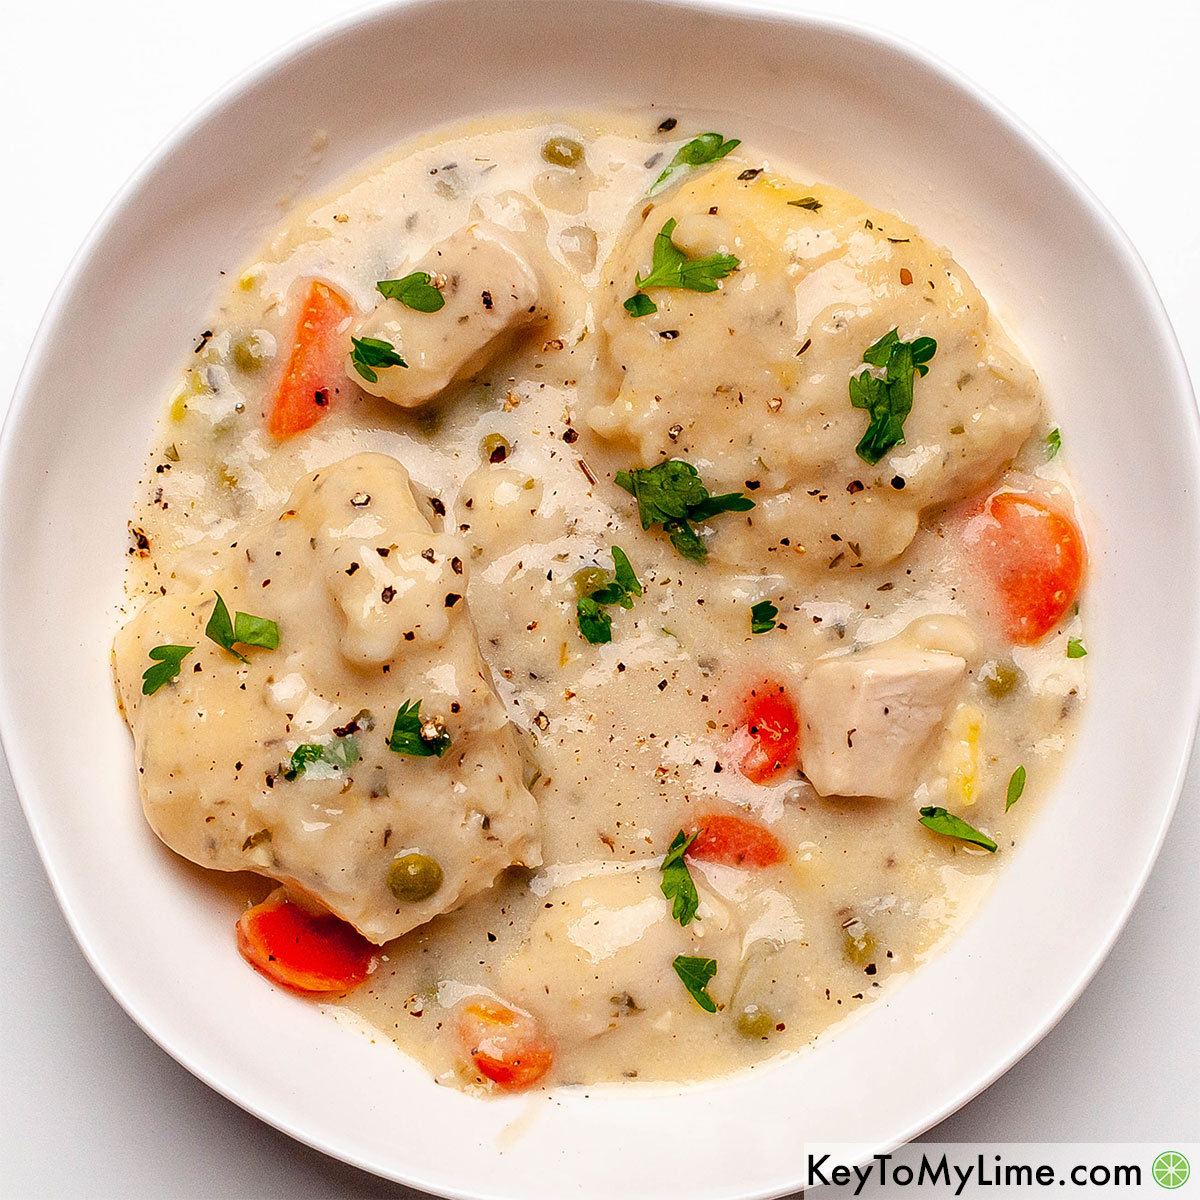 Easy Chicken and Dumplings Recipe from Scratch